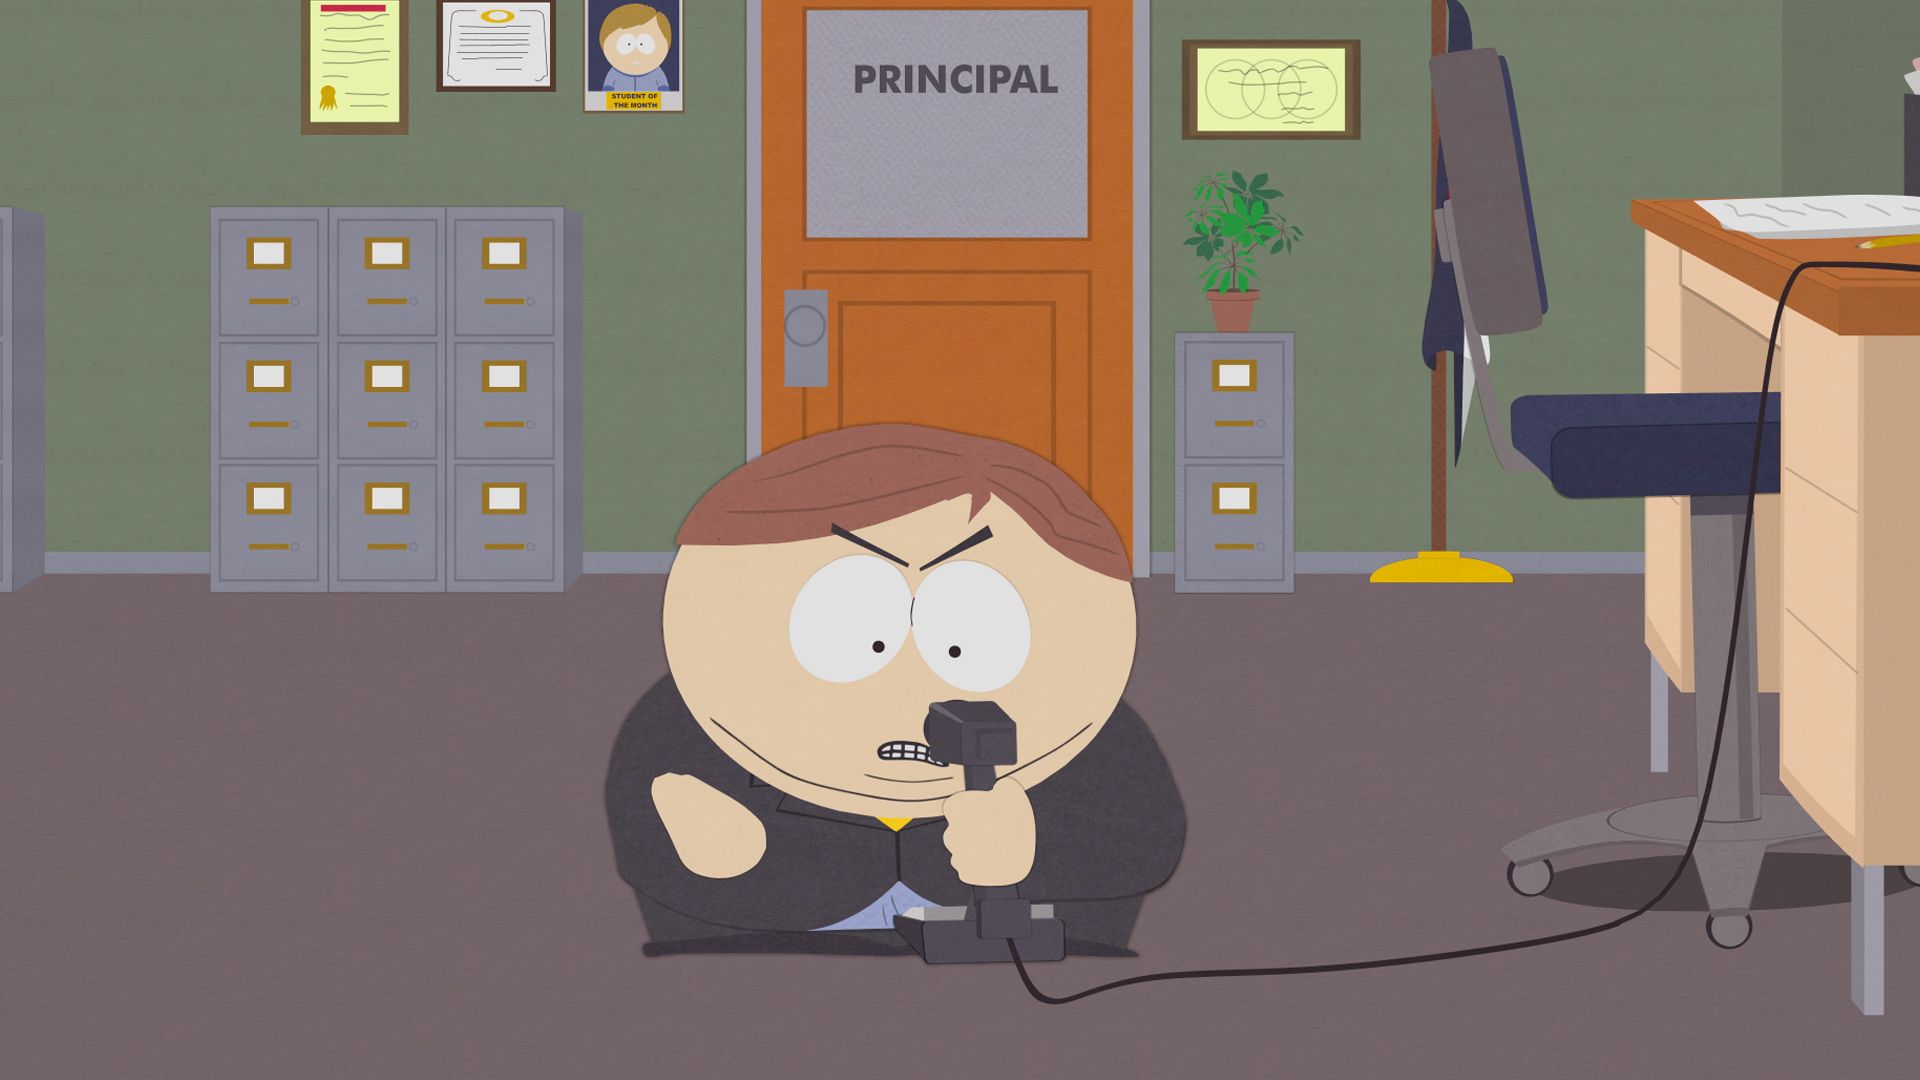 What Has Happened to My School? - Season 13 Episode 13 - South Park